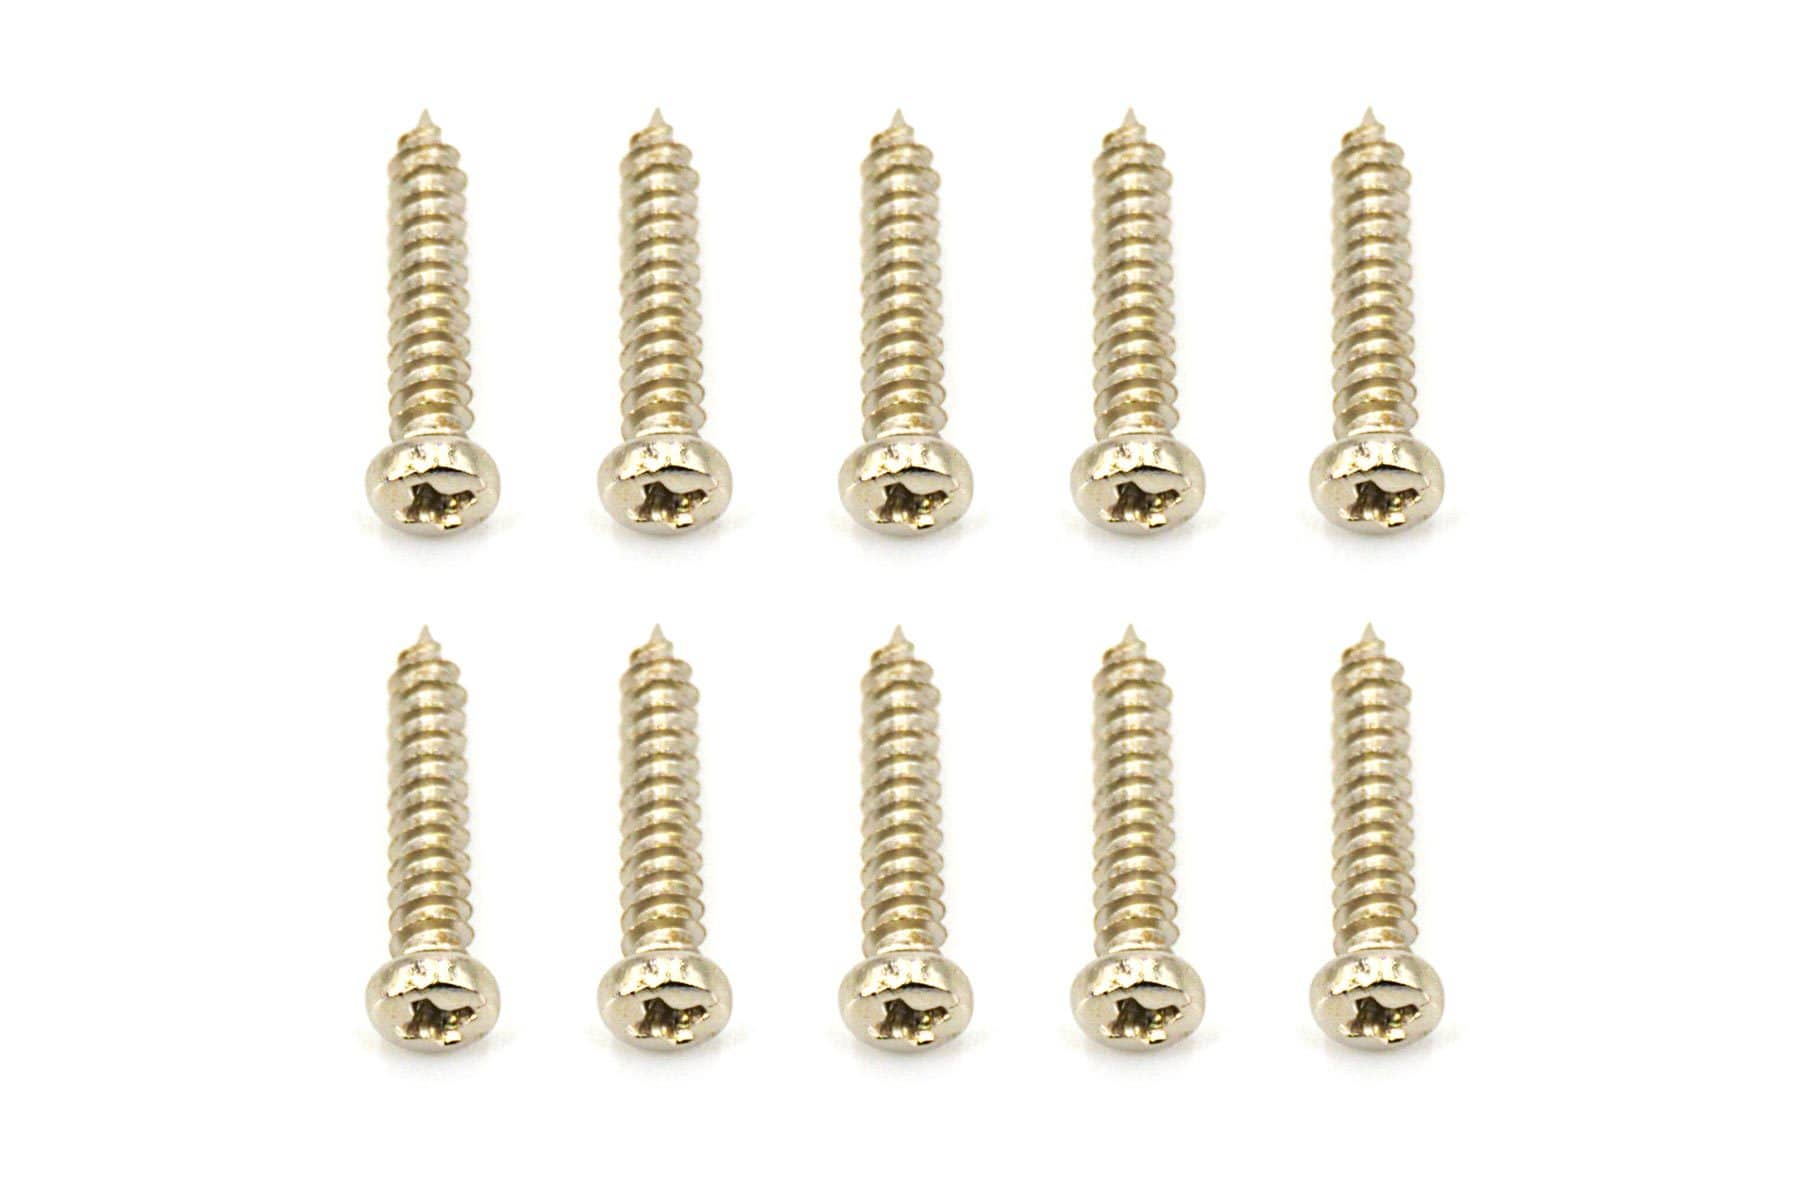 BenchCraft 2.5mm x 14mm Self-Tapping Screws (10 Pack)